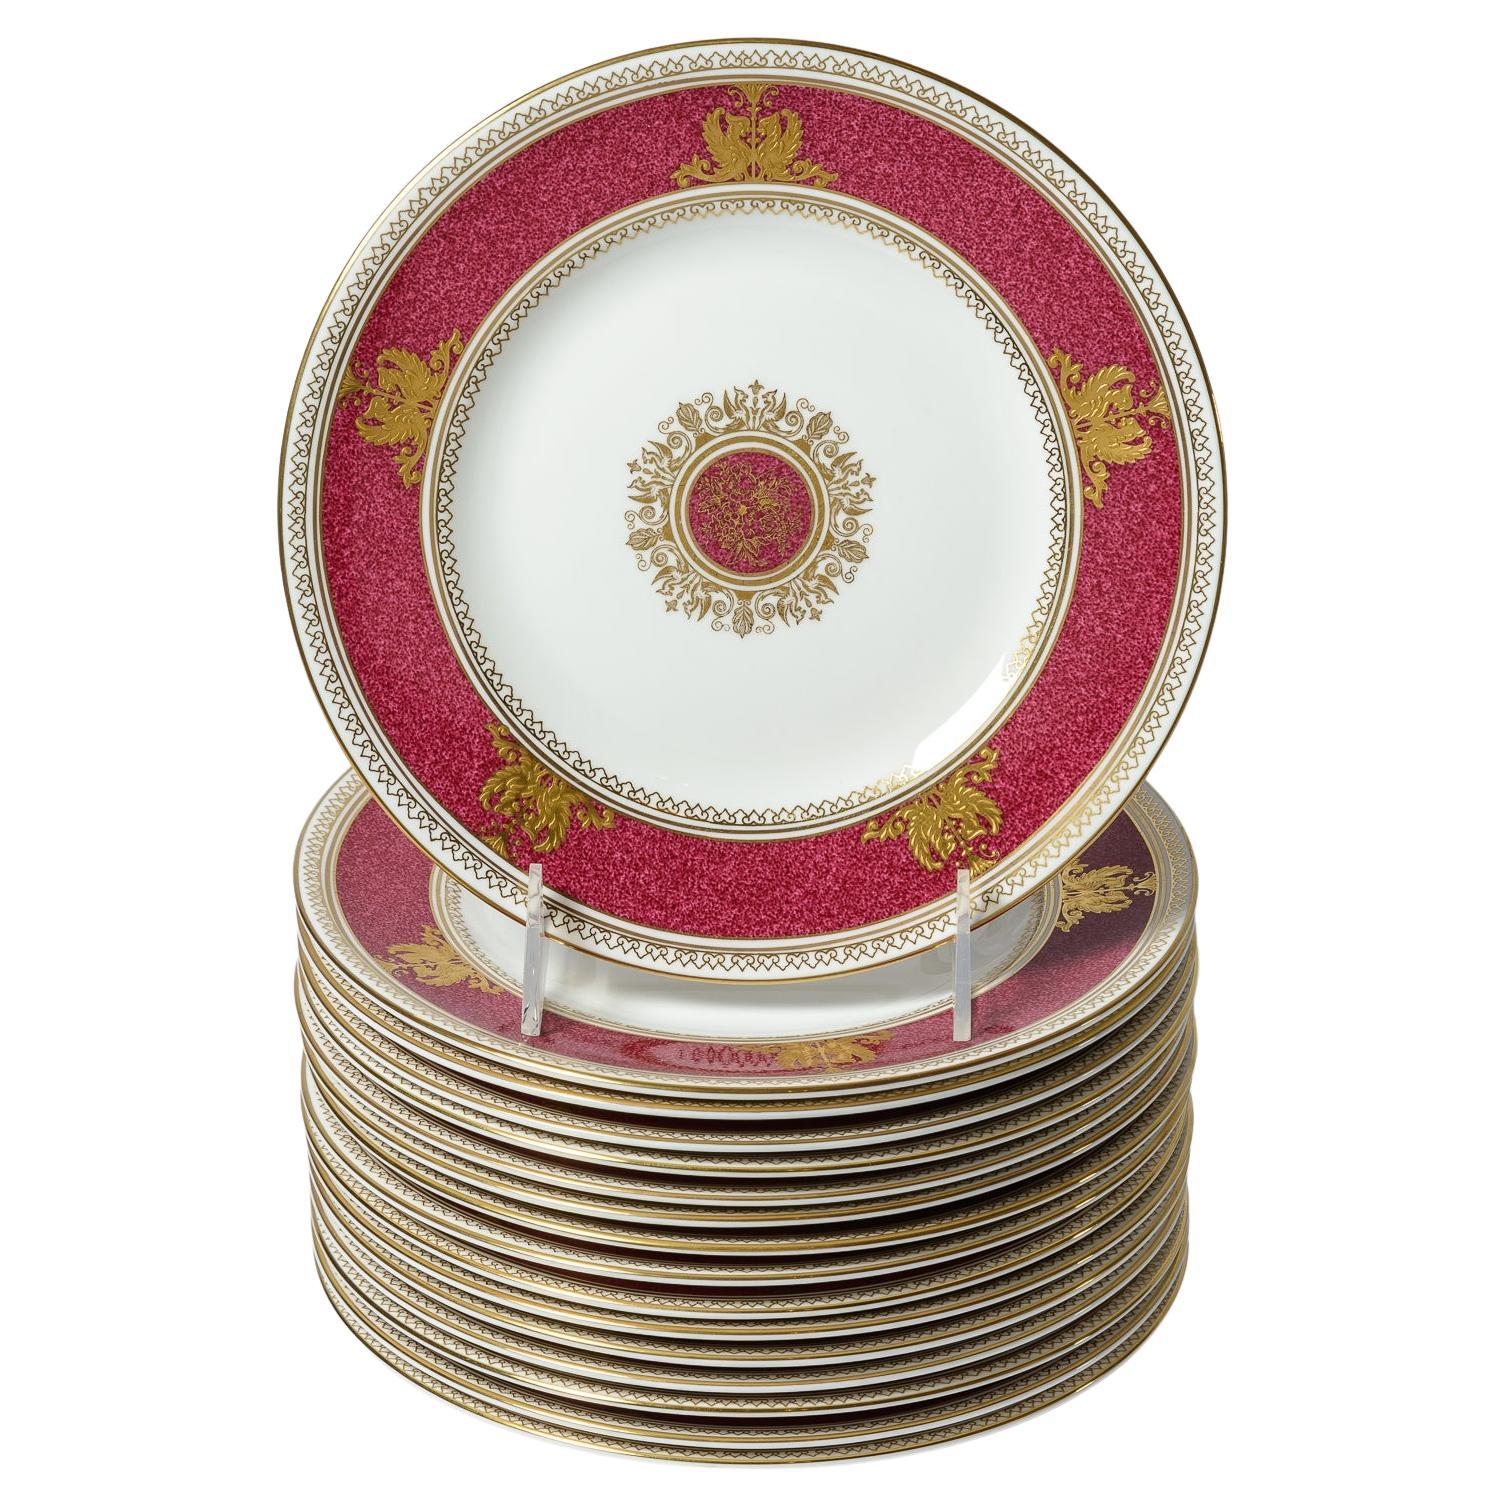 16 Vintage Wedgwood Ruby Gilt Encrusted Dessert or First Course Plates For Sale